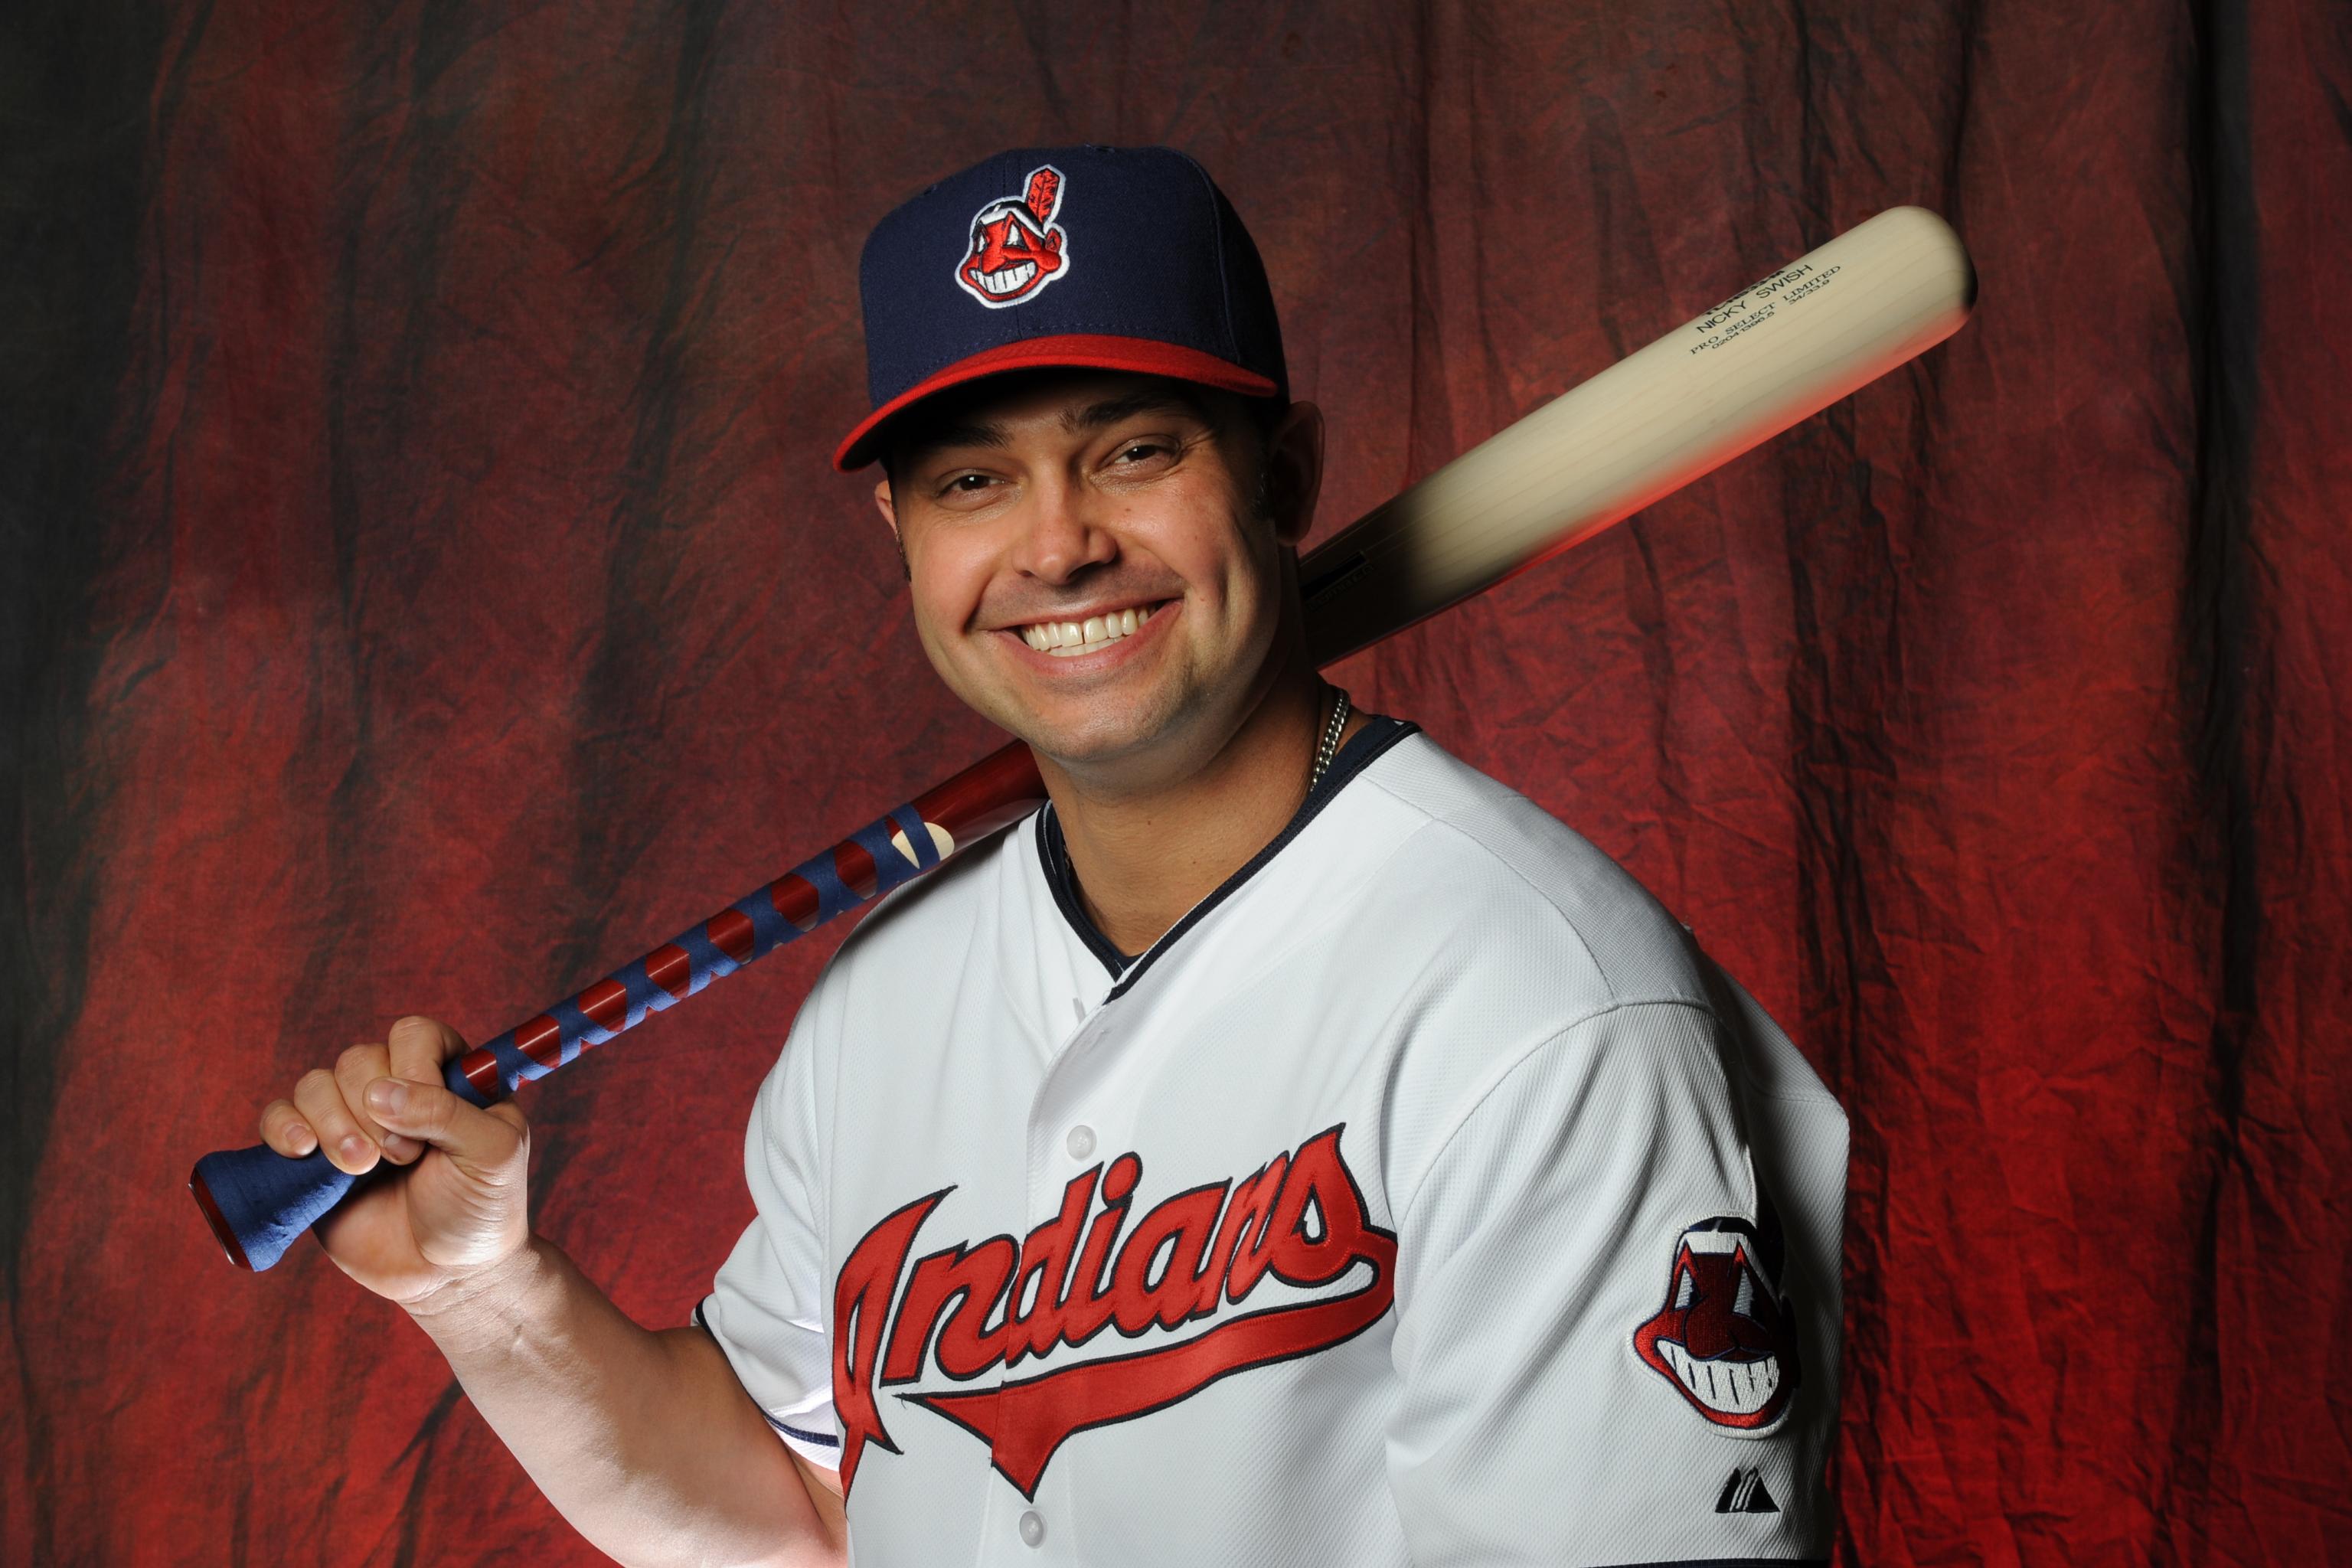 Yankees outfielder Nick Swisher learns of life on the other side